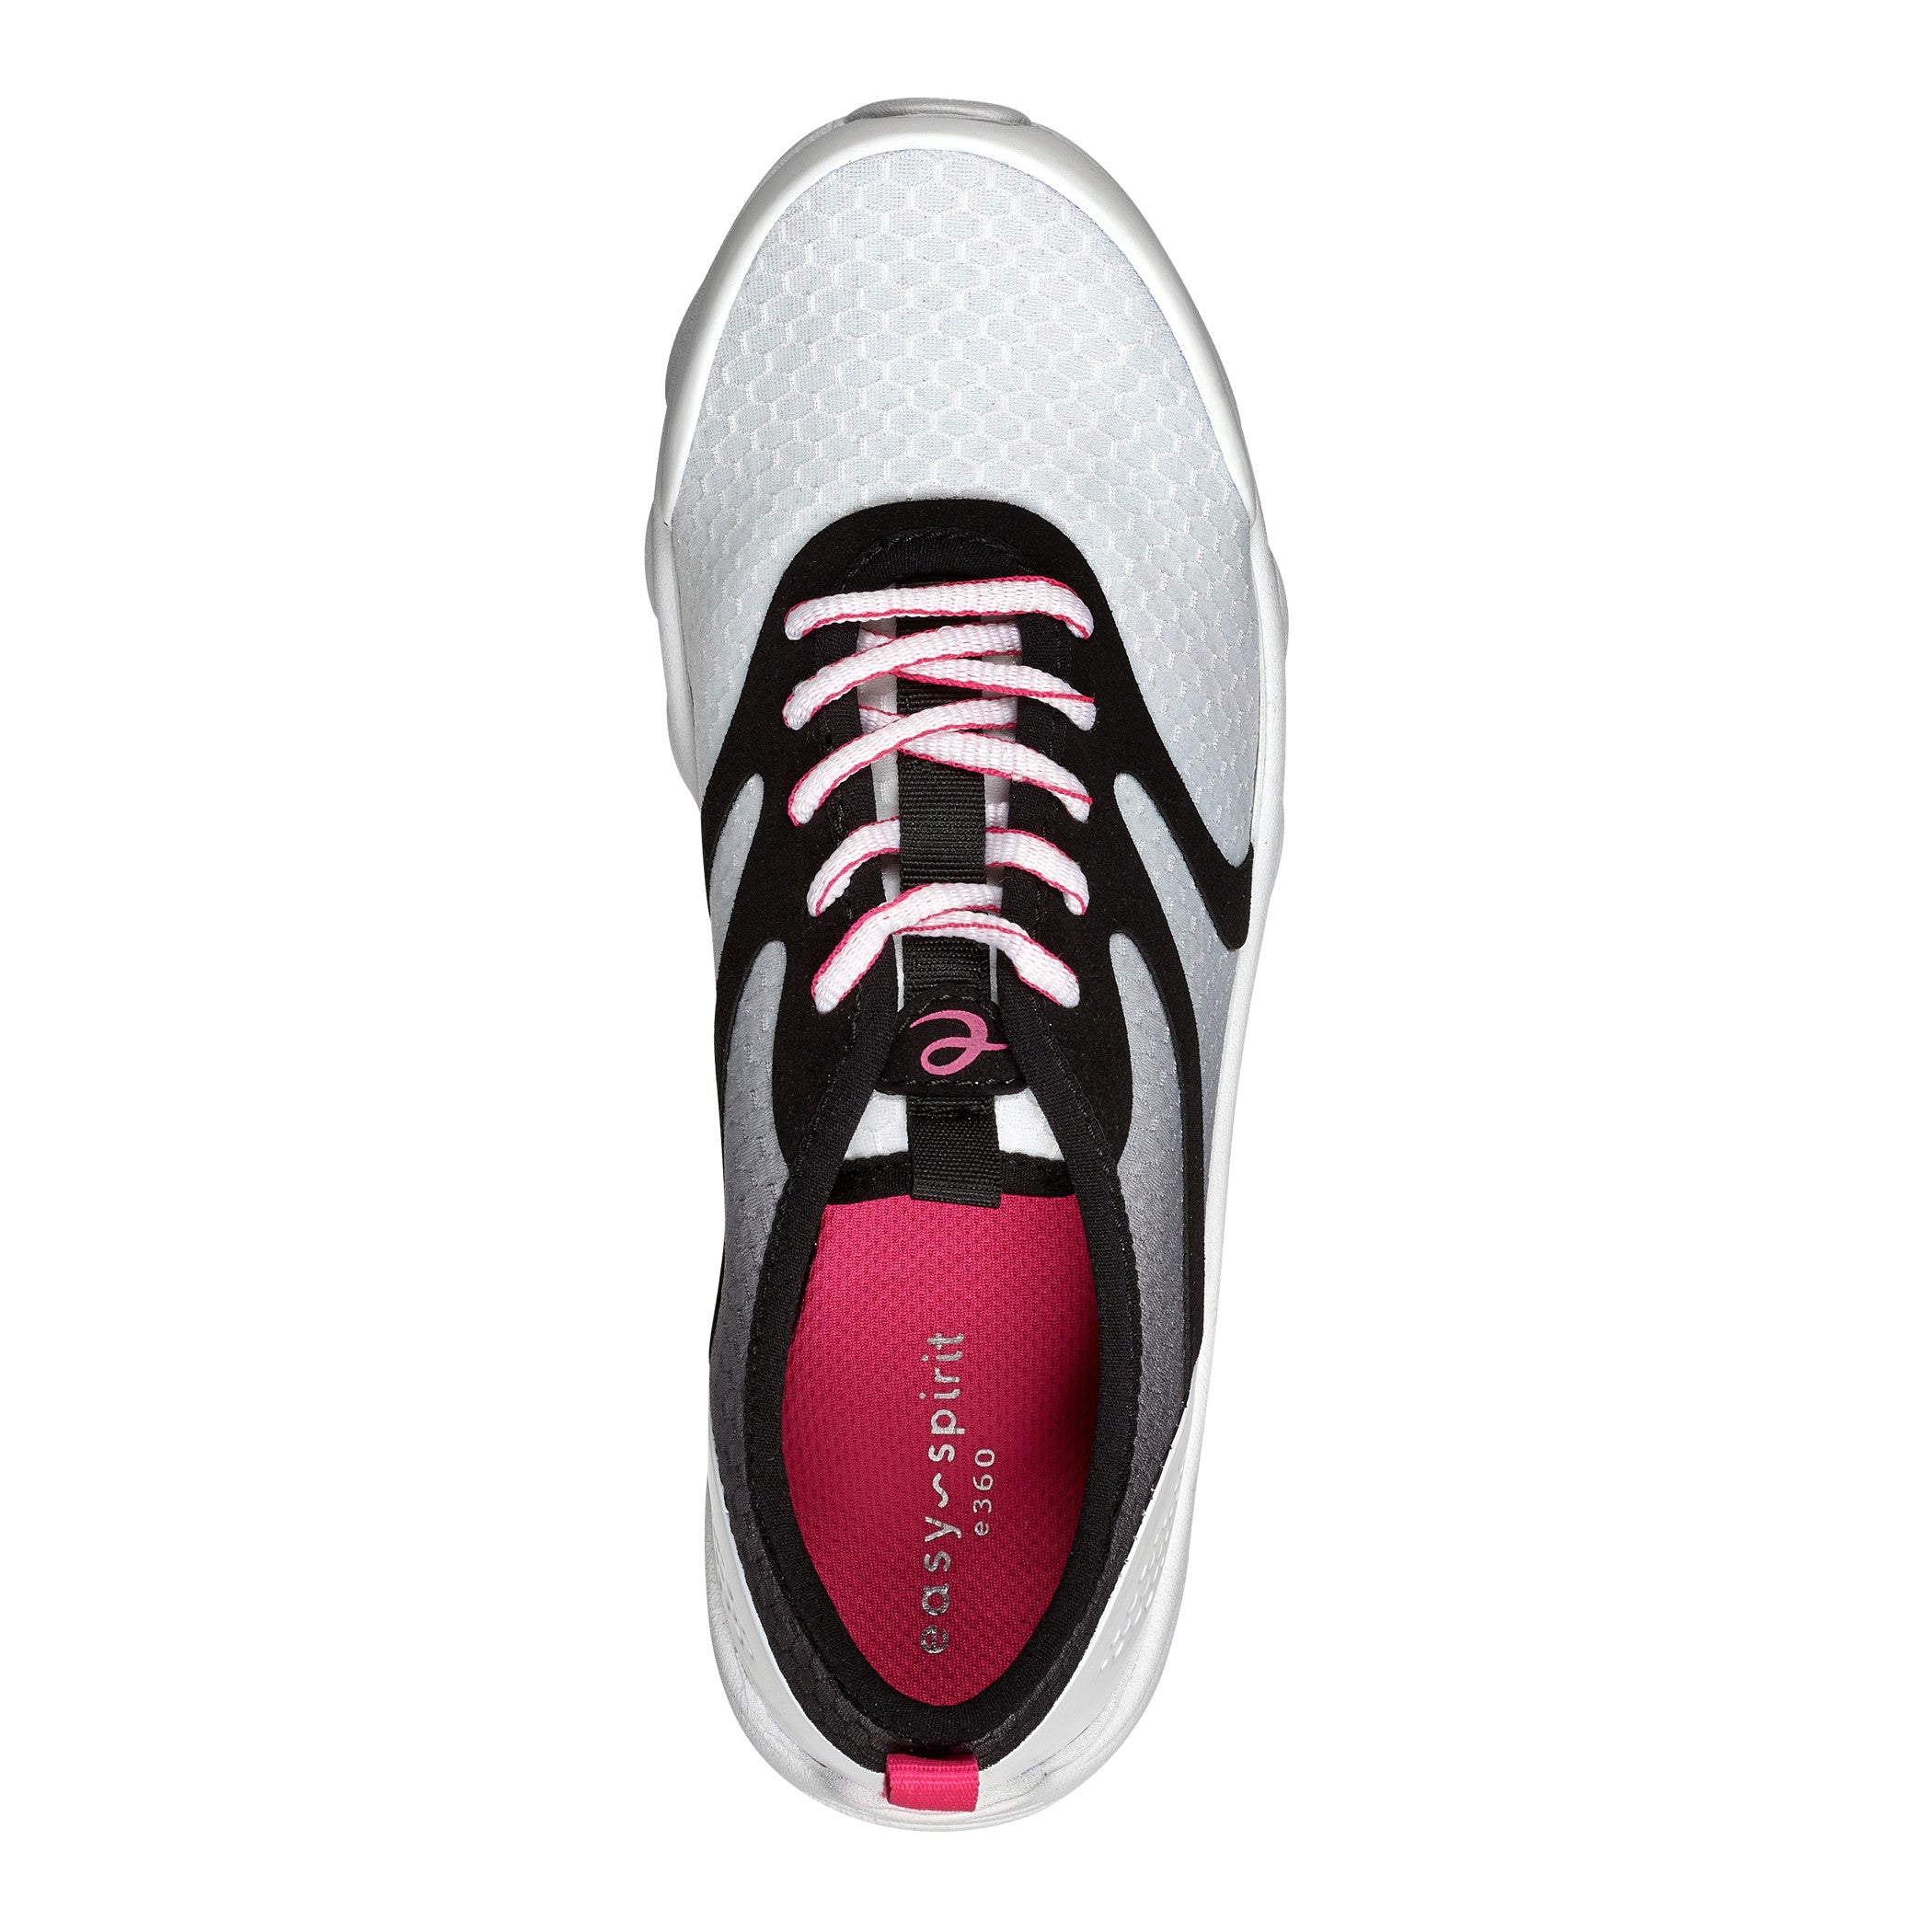 Reinvent Lace Up Walking Shoes